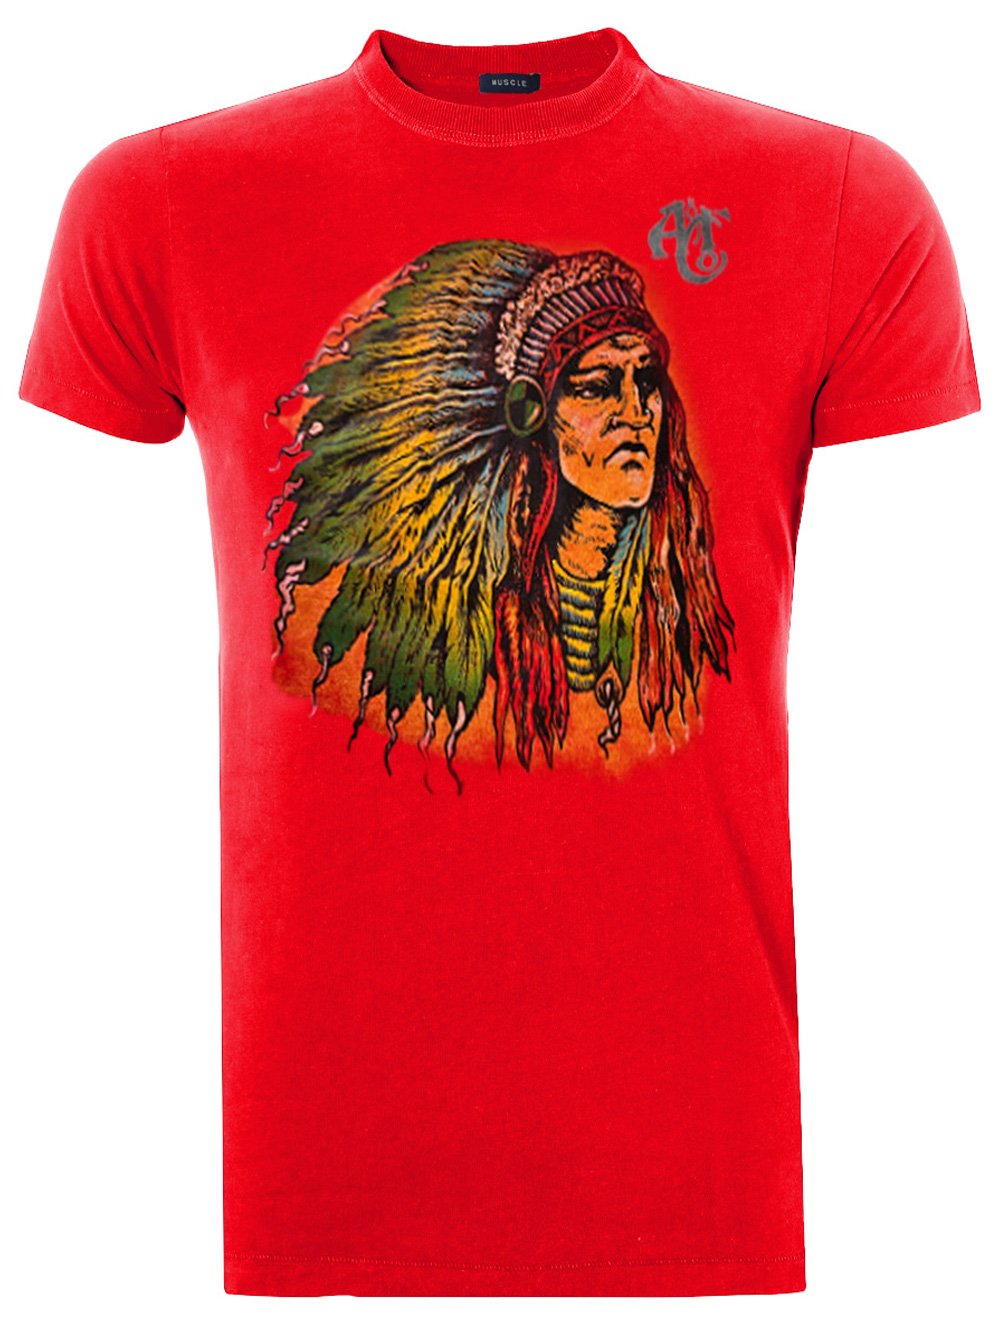 Camiseta Abercrombie Masculina Muscle Sketch Indian Chief Vermelha